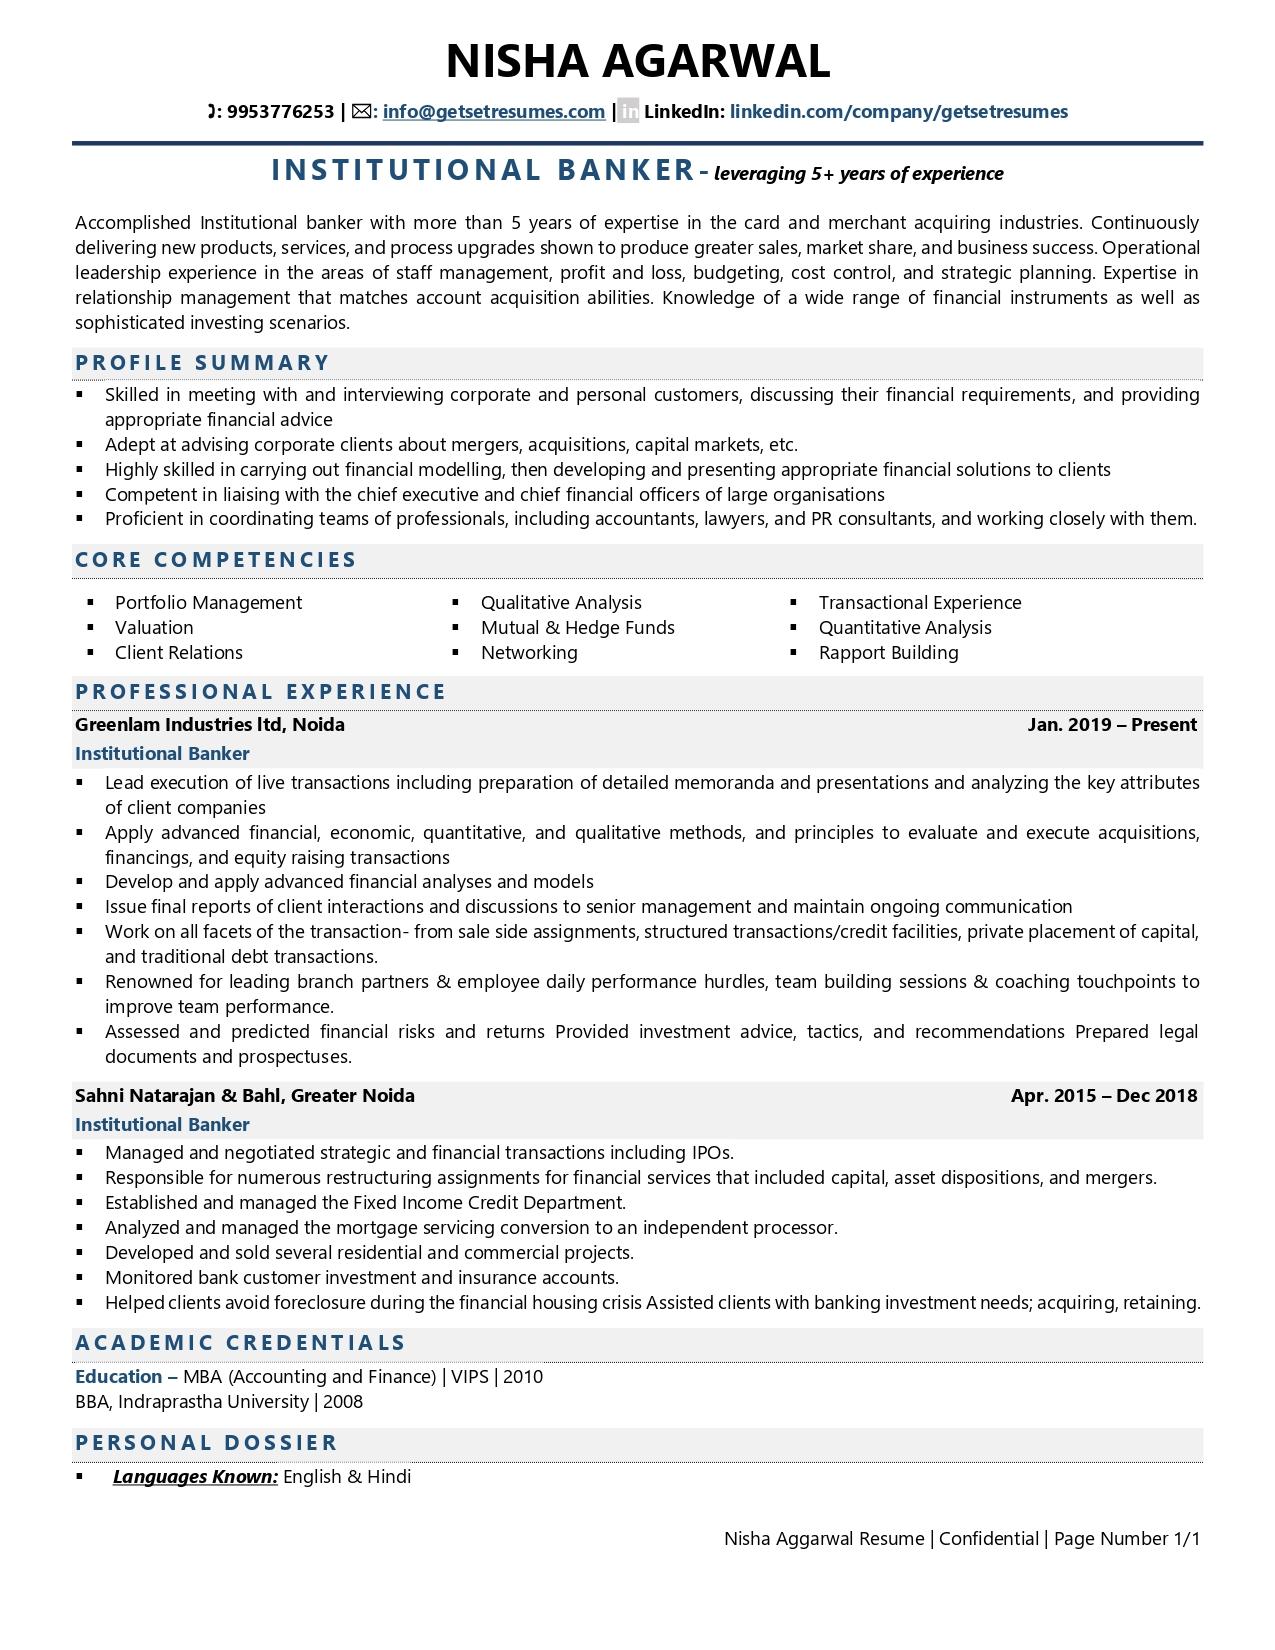 Institutional Banker - Resume Example & Template